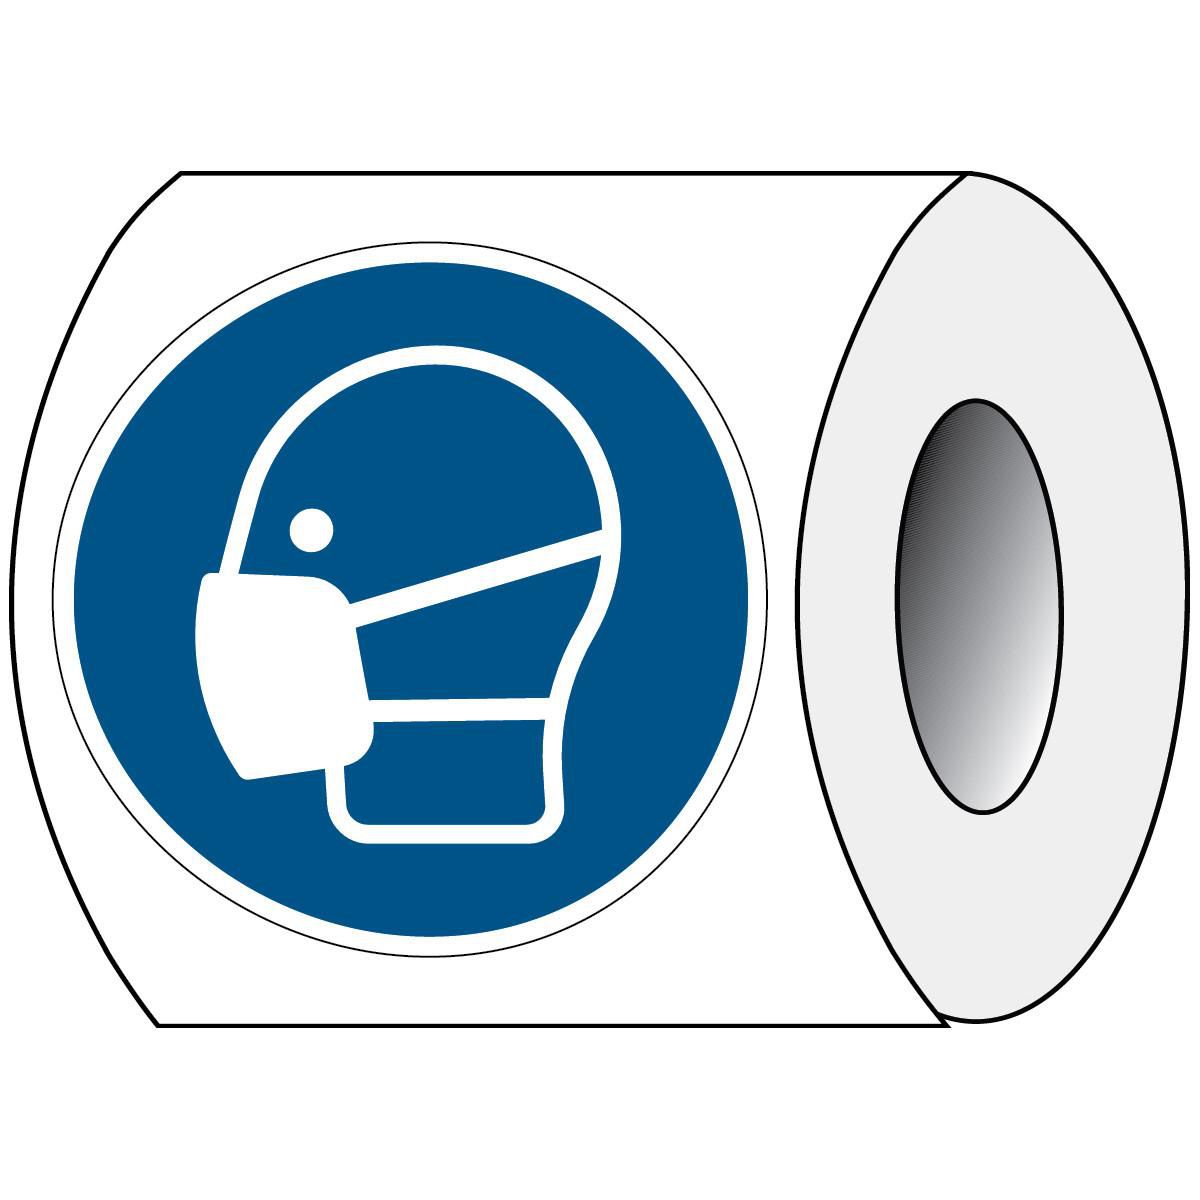 Brady PIC M016-DIA 100-PE-ROLL1 W128422525 ISO Safety Sign - Wear a mask 